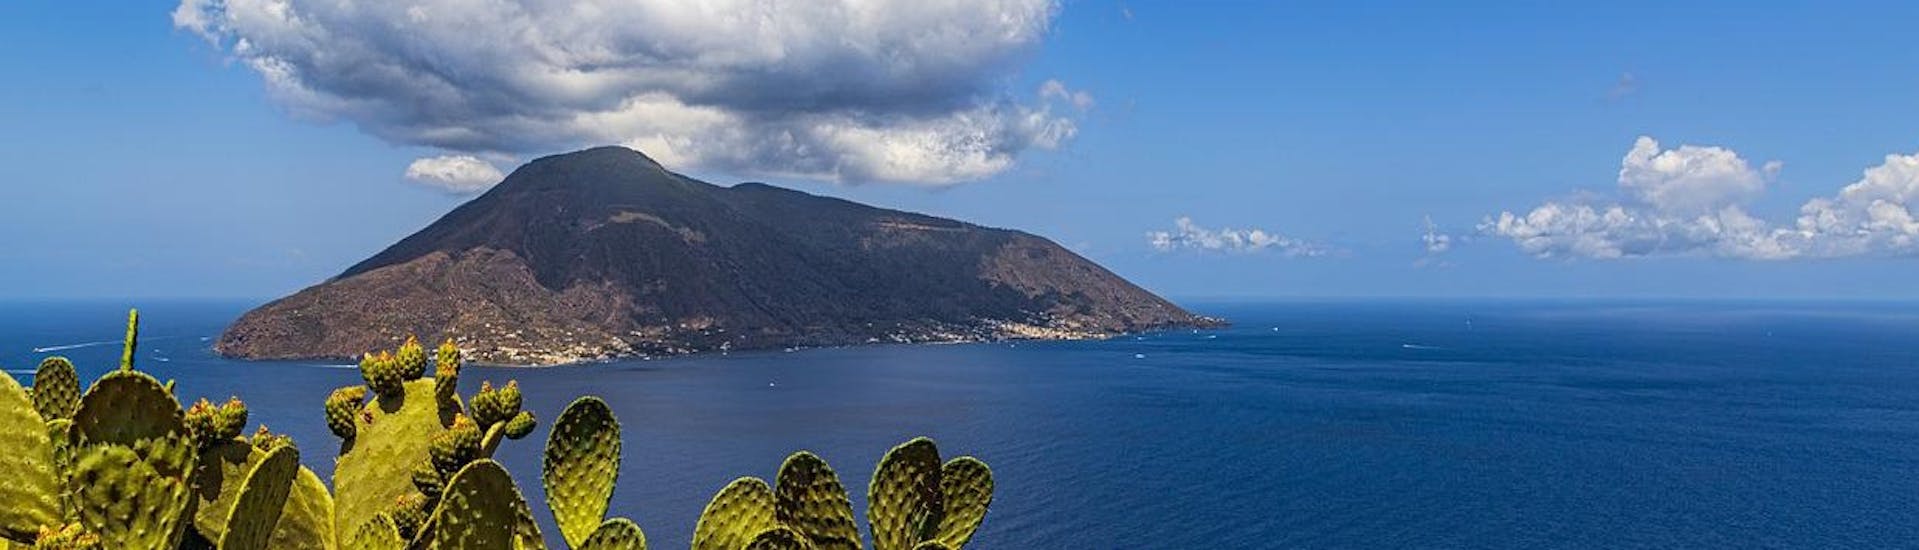 Breathtaking views of the island of Salina to visit during a private yacht trip from Cefalù to Salina with an aperitif with Margy Charter.